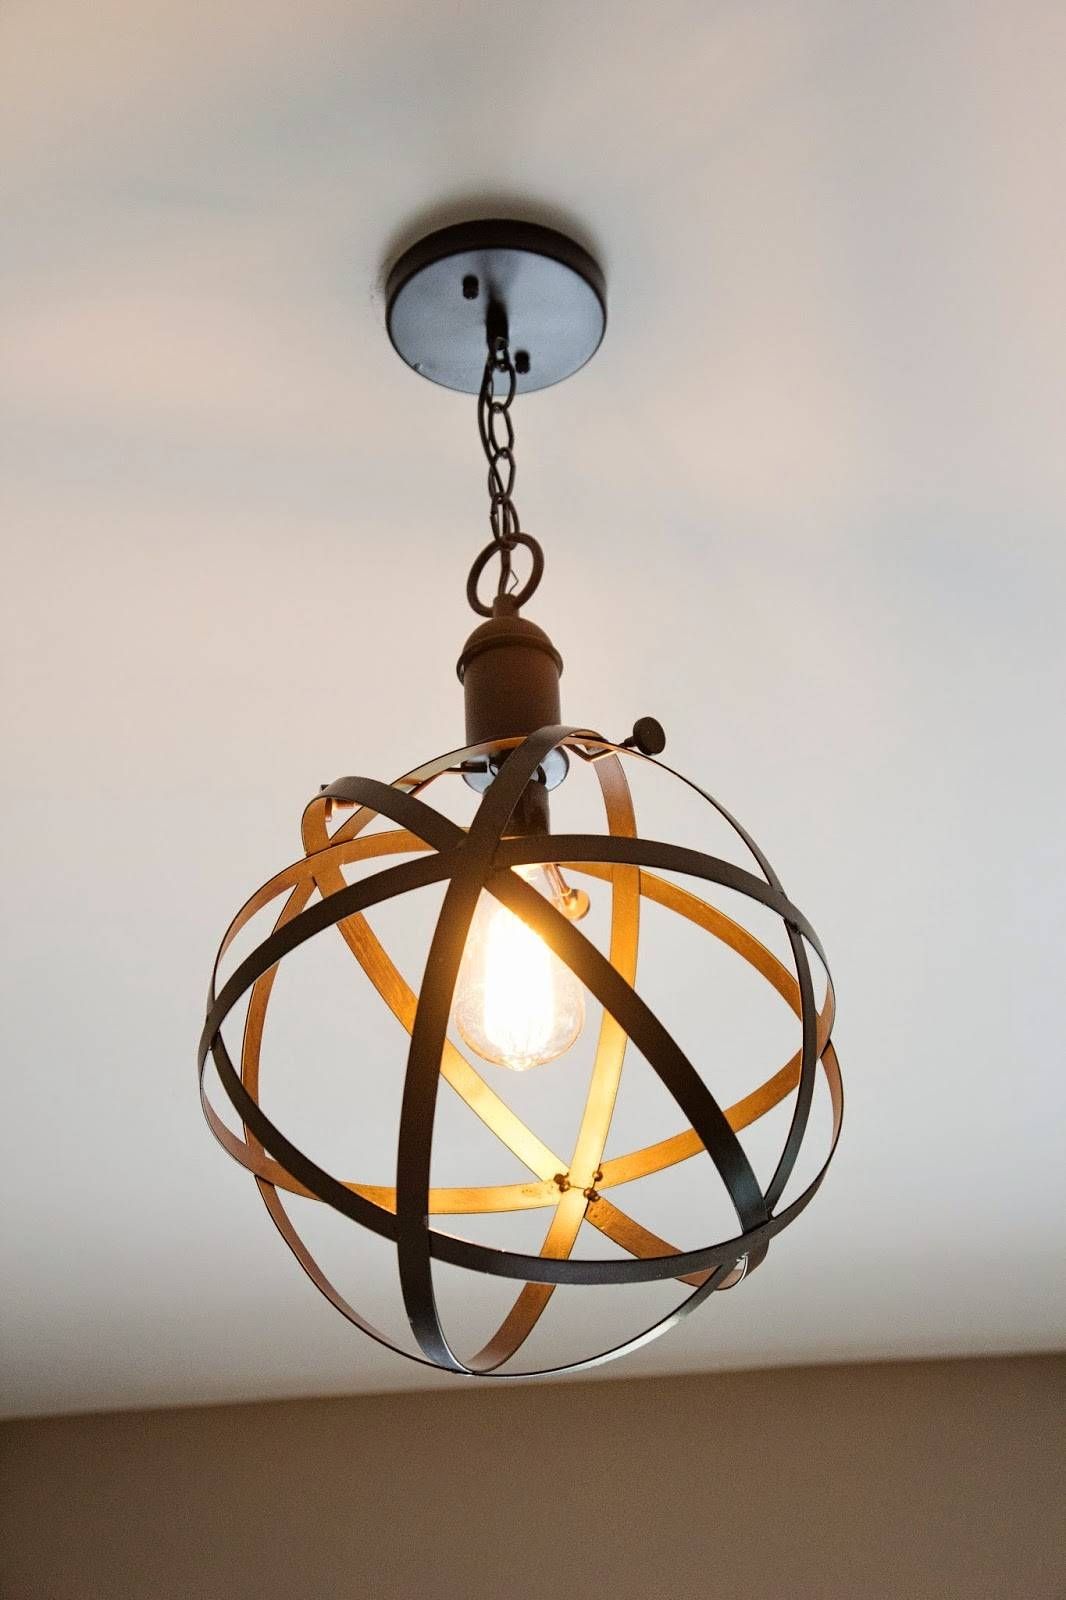 Diy Industrial Rustic Pendant Light – Bless'er House Intended For Rustic Light Pendants (View 3 of 15)